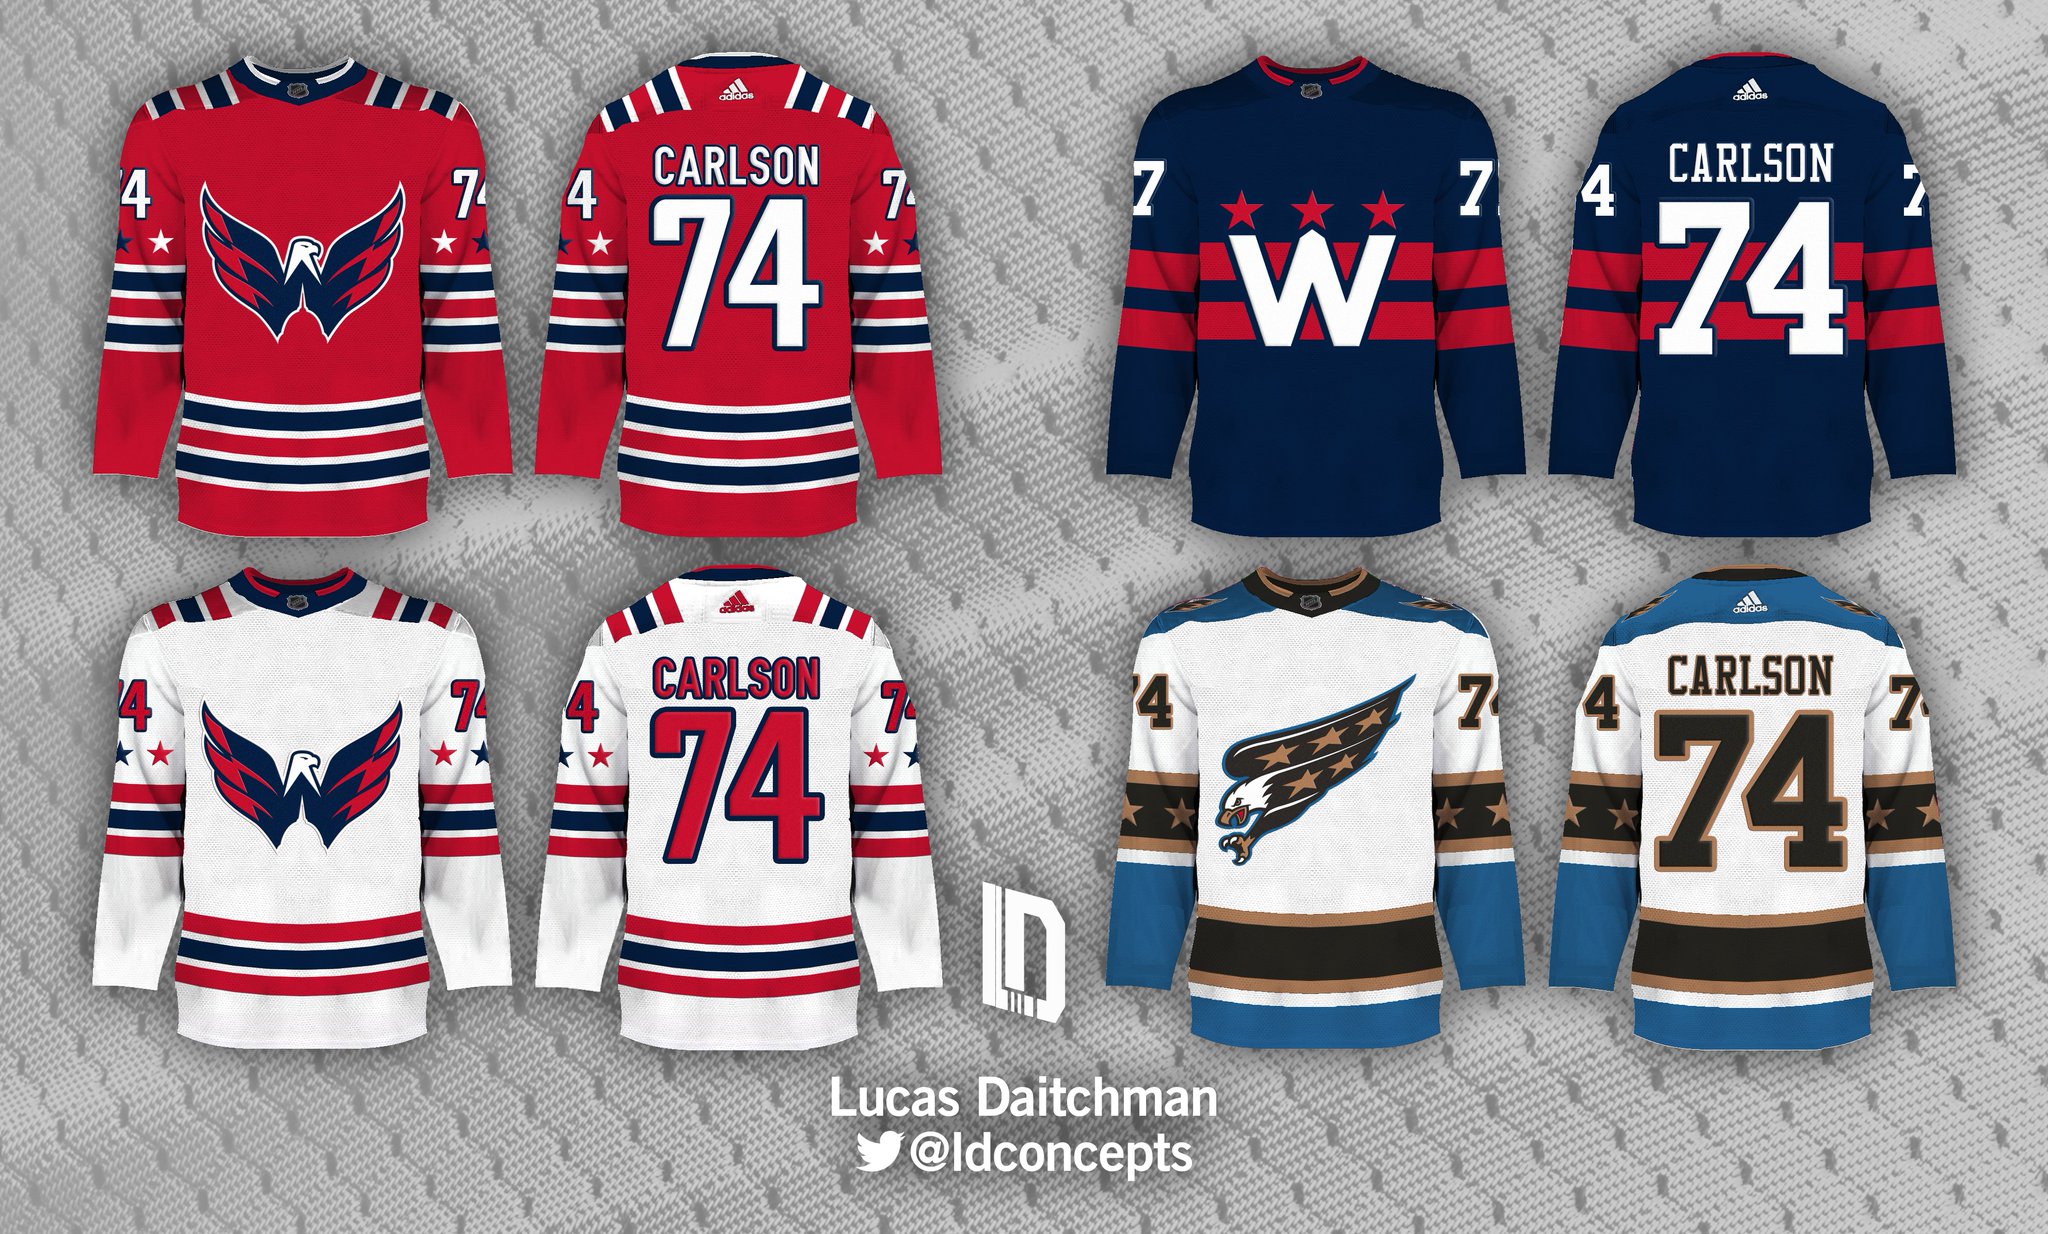 Lucas Daitchman on X: A pair of #STLBlues jersey concepts merging